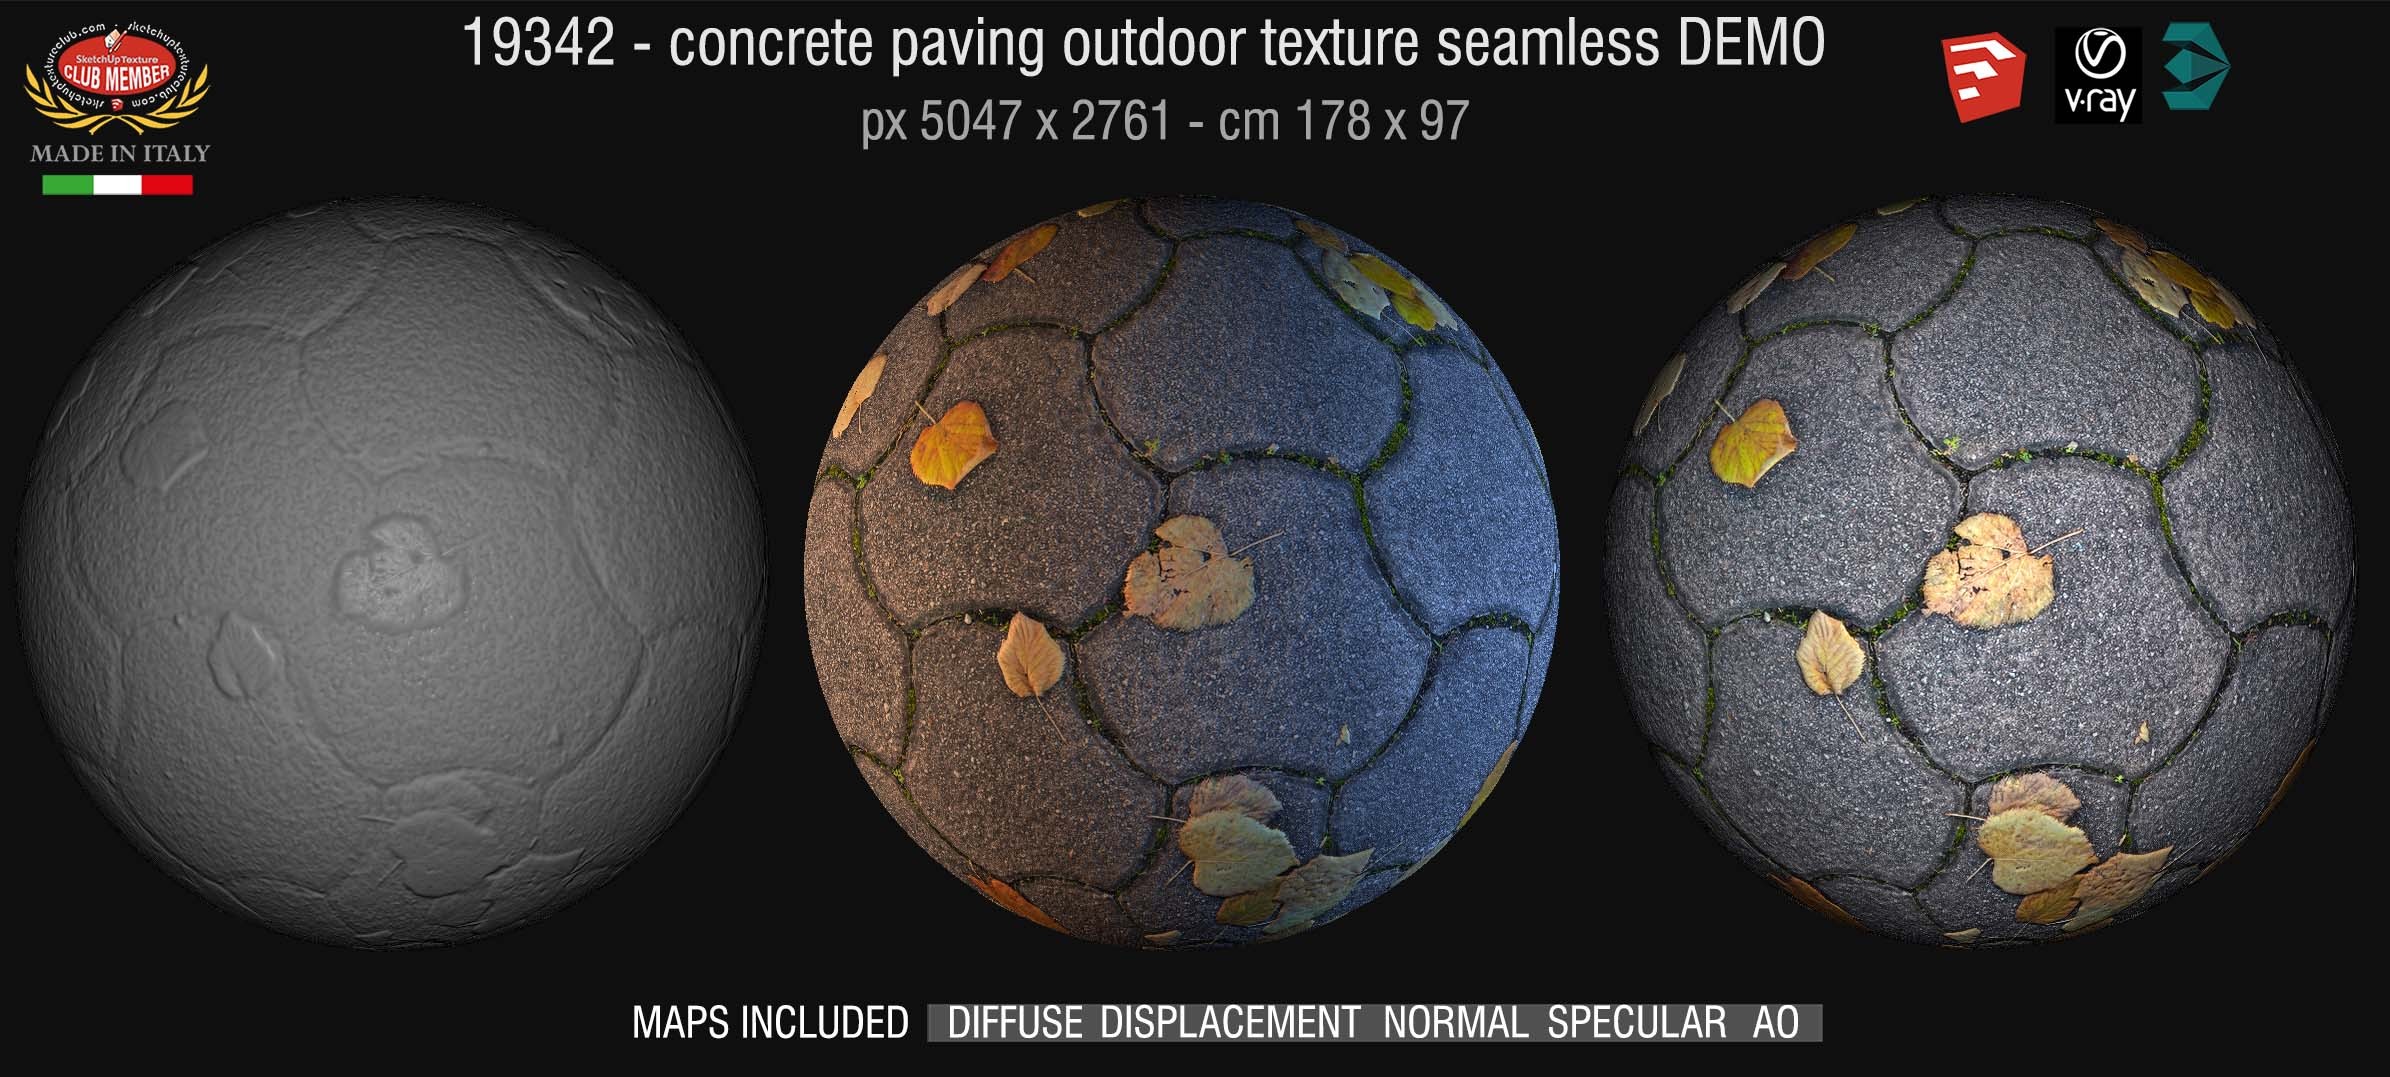 19342 HR Concrete paving outdoor with dead leaves texture + maps DEMO